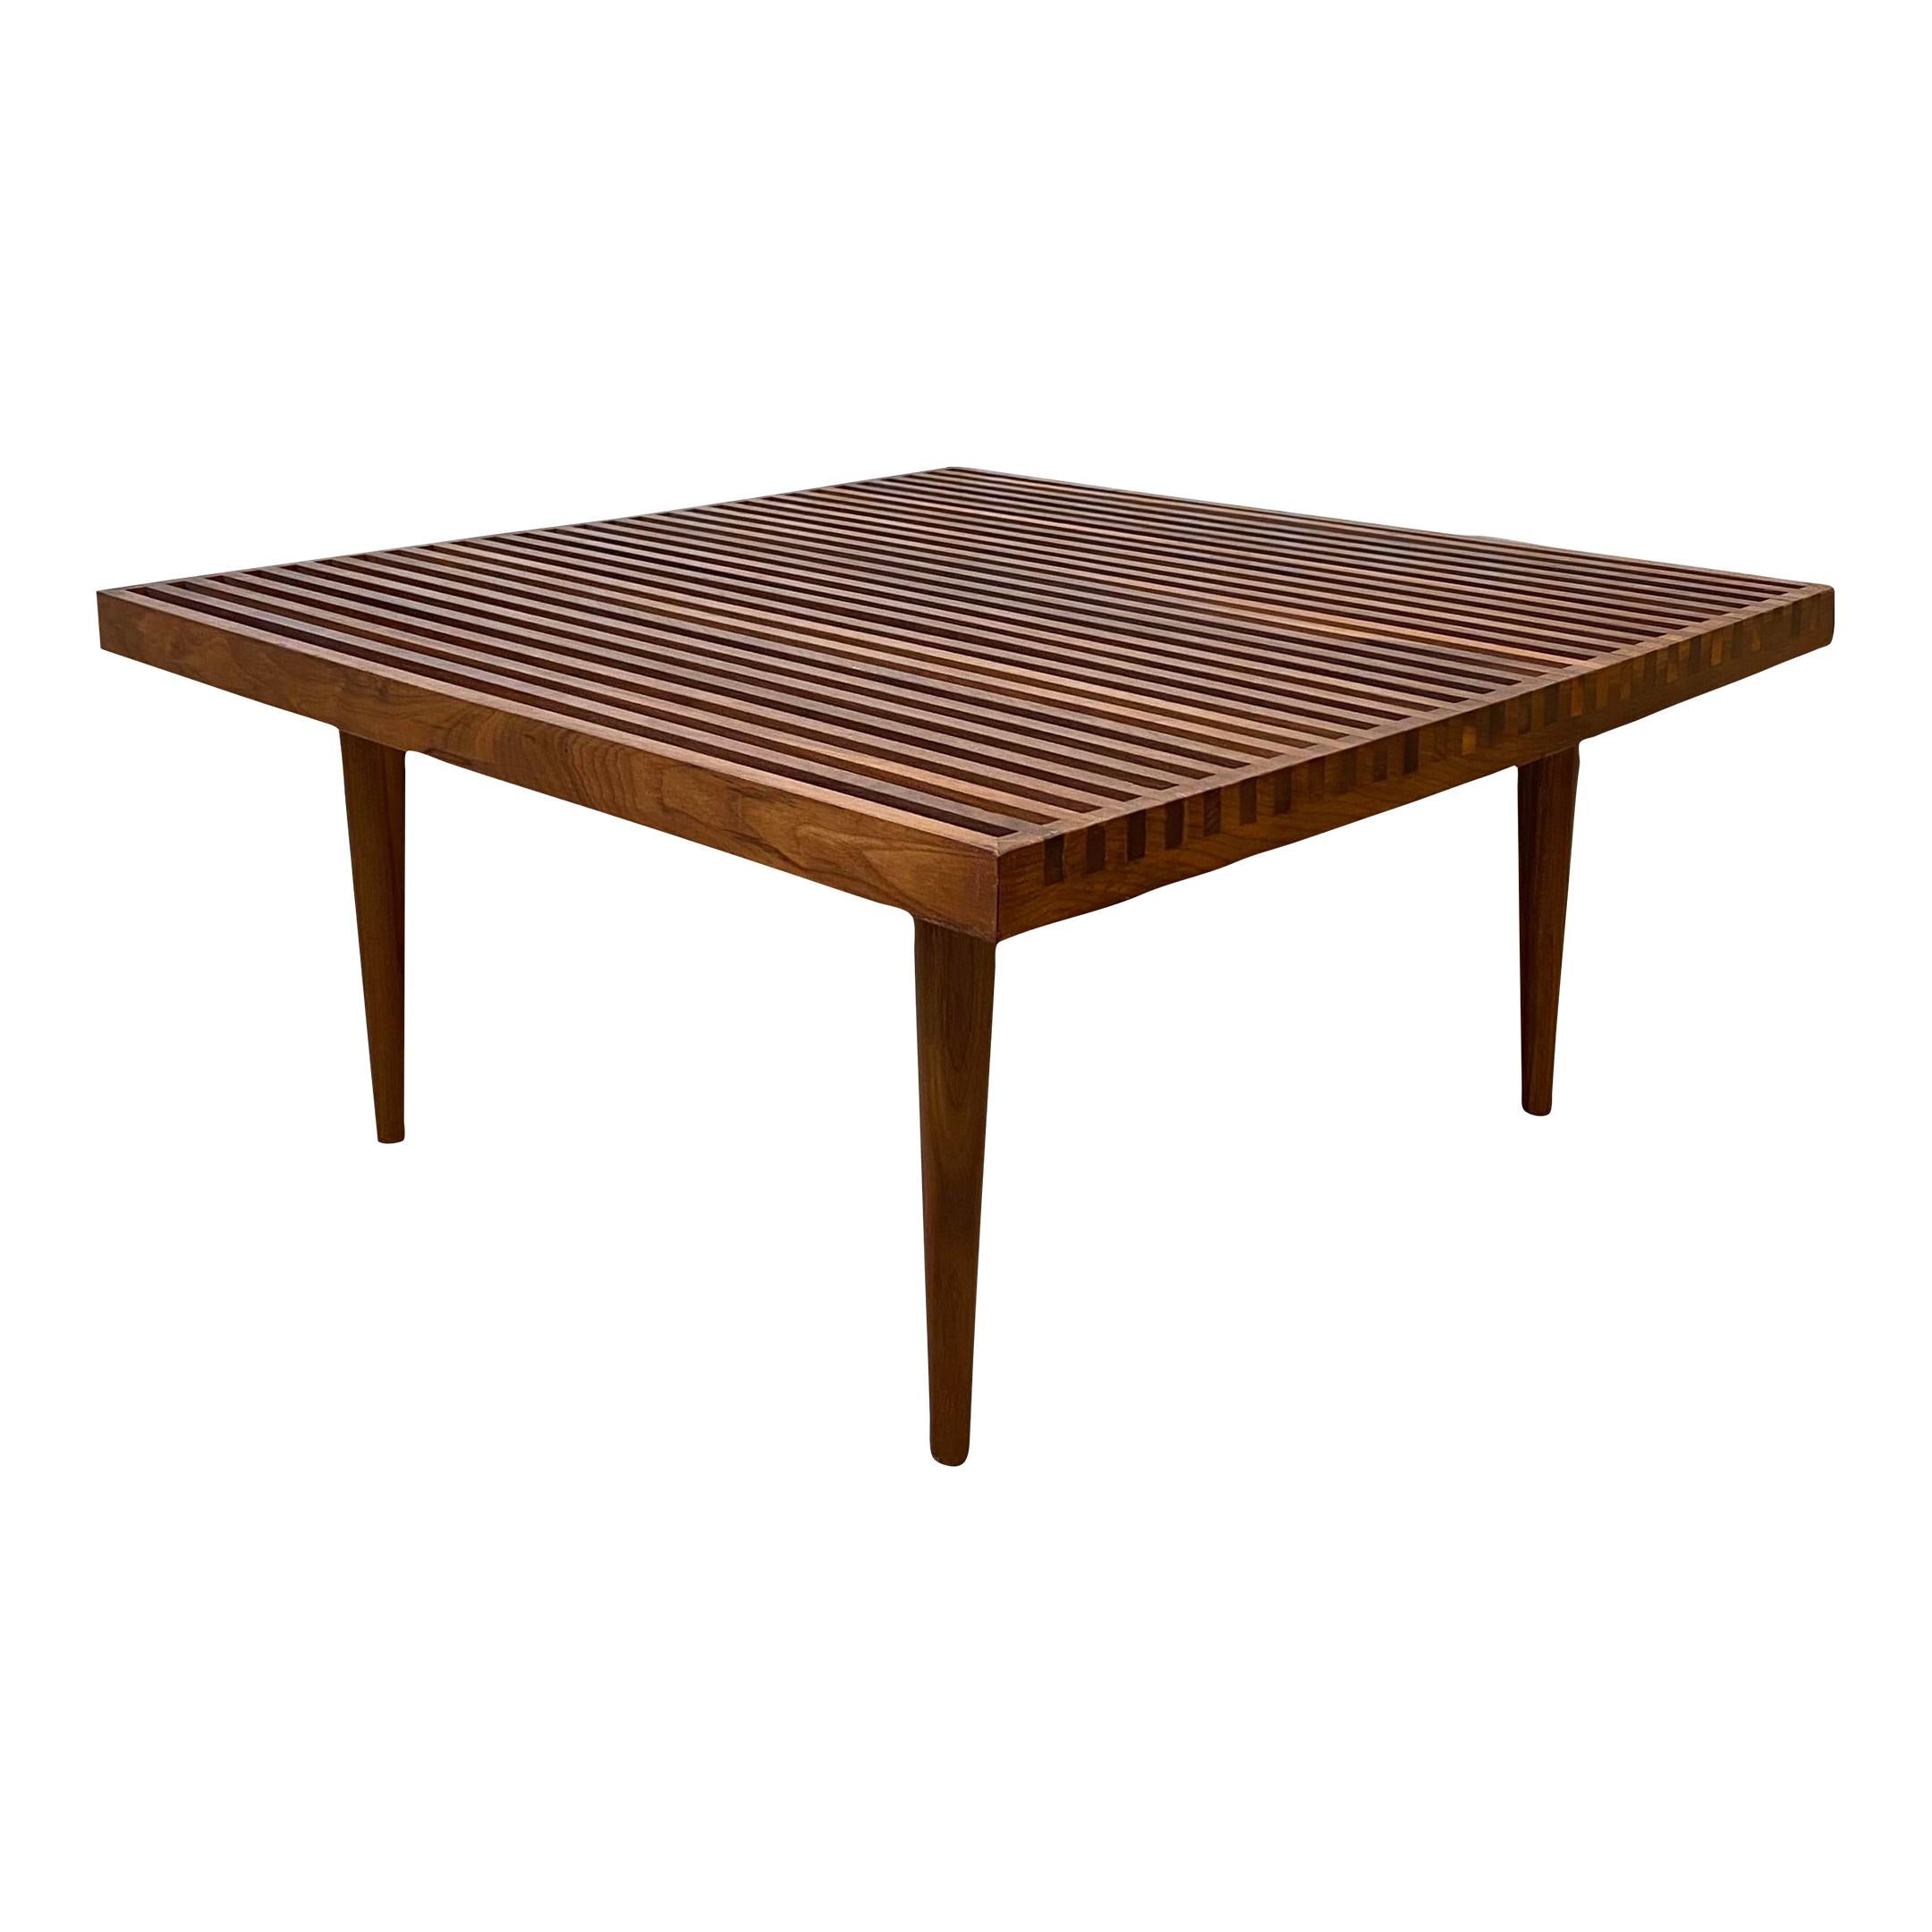 Mid-Century Modern slat coffee or side table by Mel Smilow.
Listing is for each table, two available sold separately.
Walnut dovetailed slated table design.
Tables could be used individually as a single or double coffee table or side table set up.